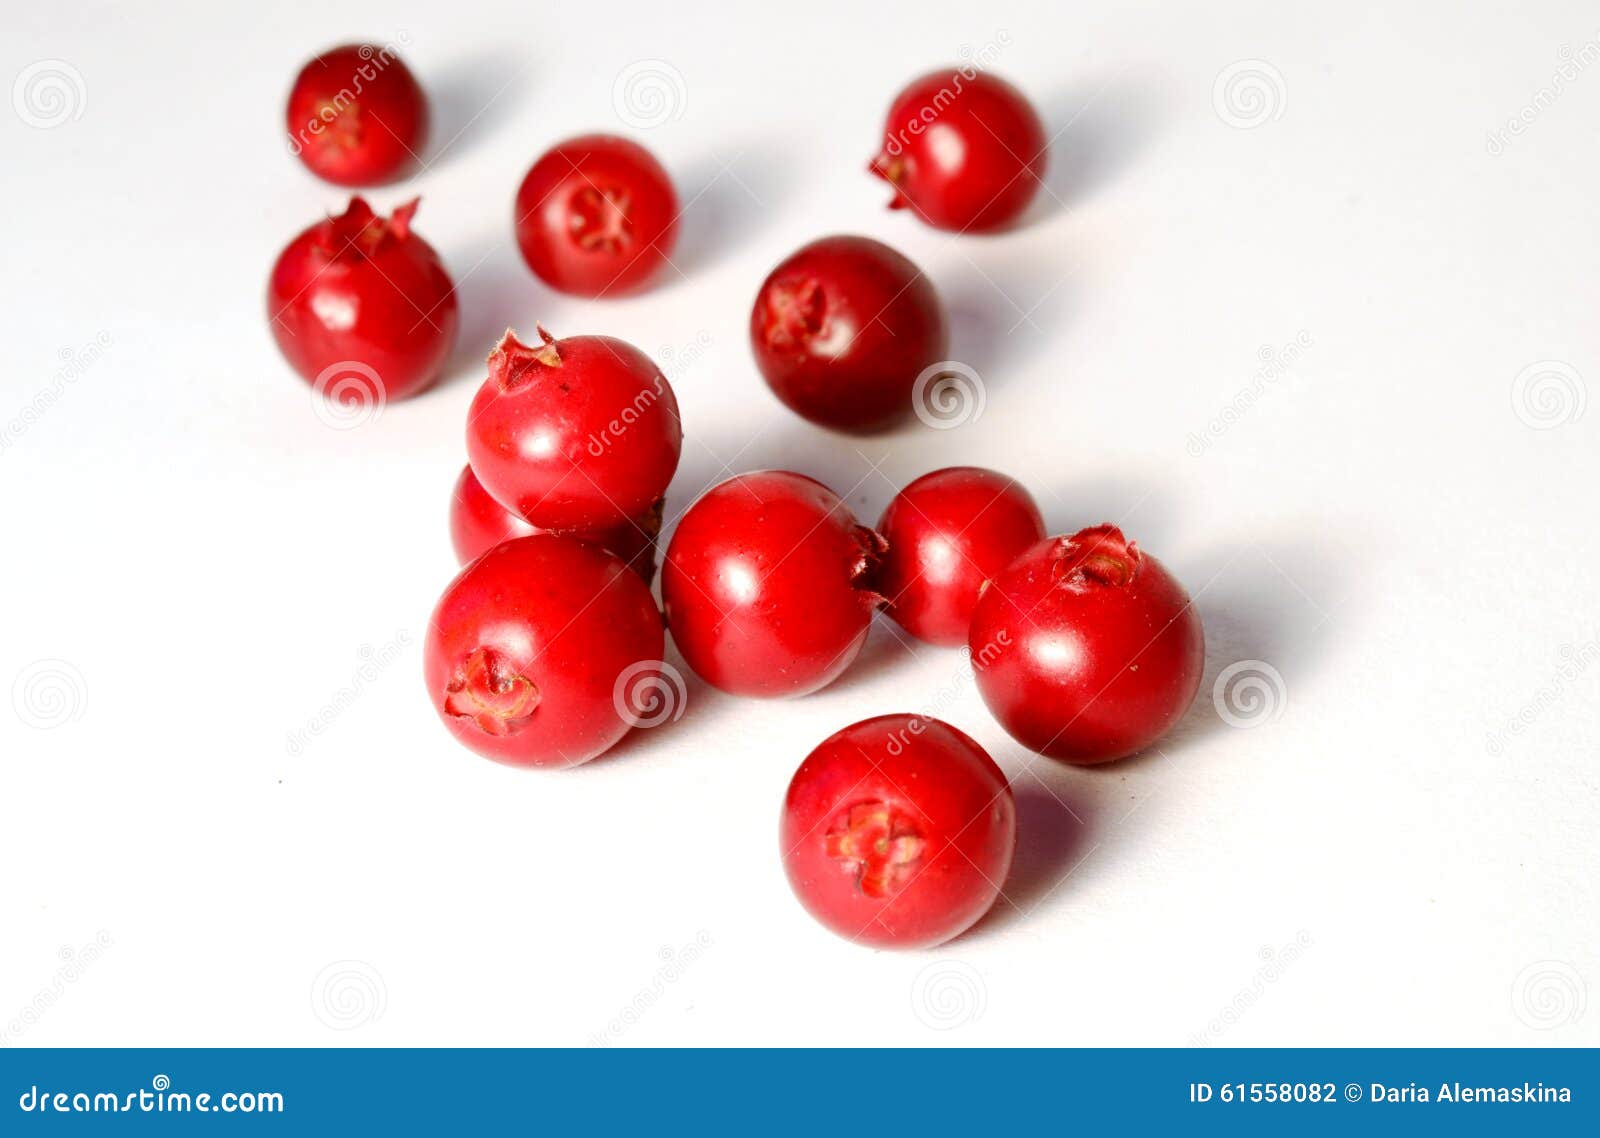 placer of fresh ripe cranberries or cowberries on white